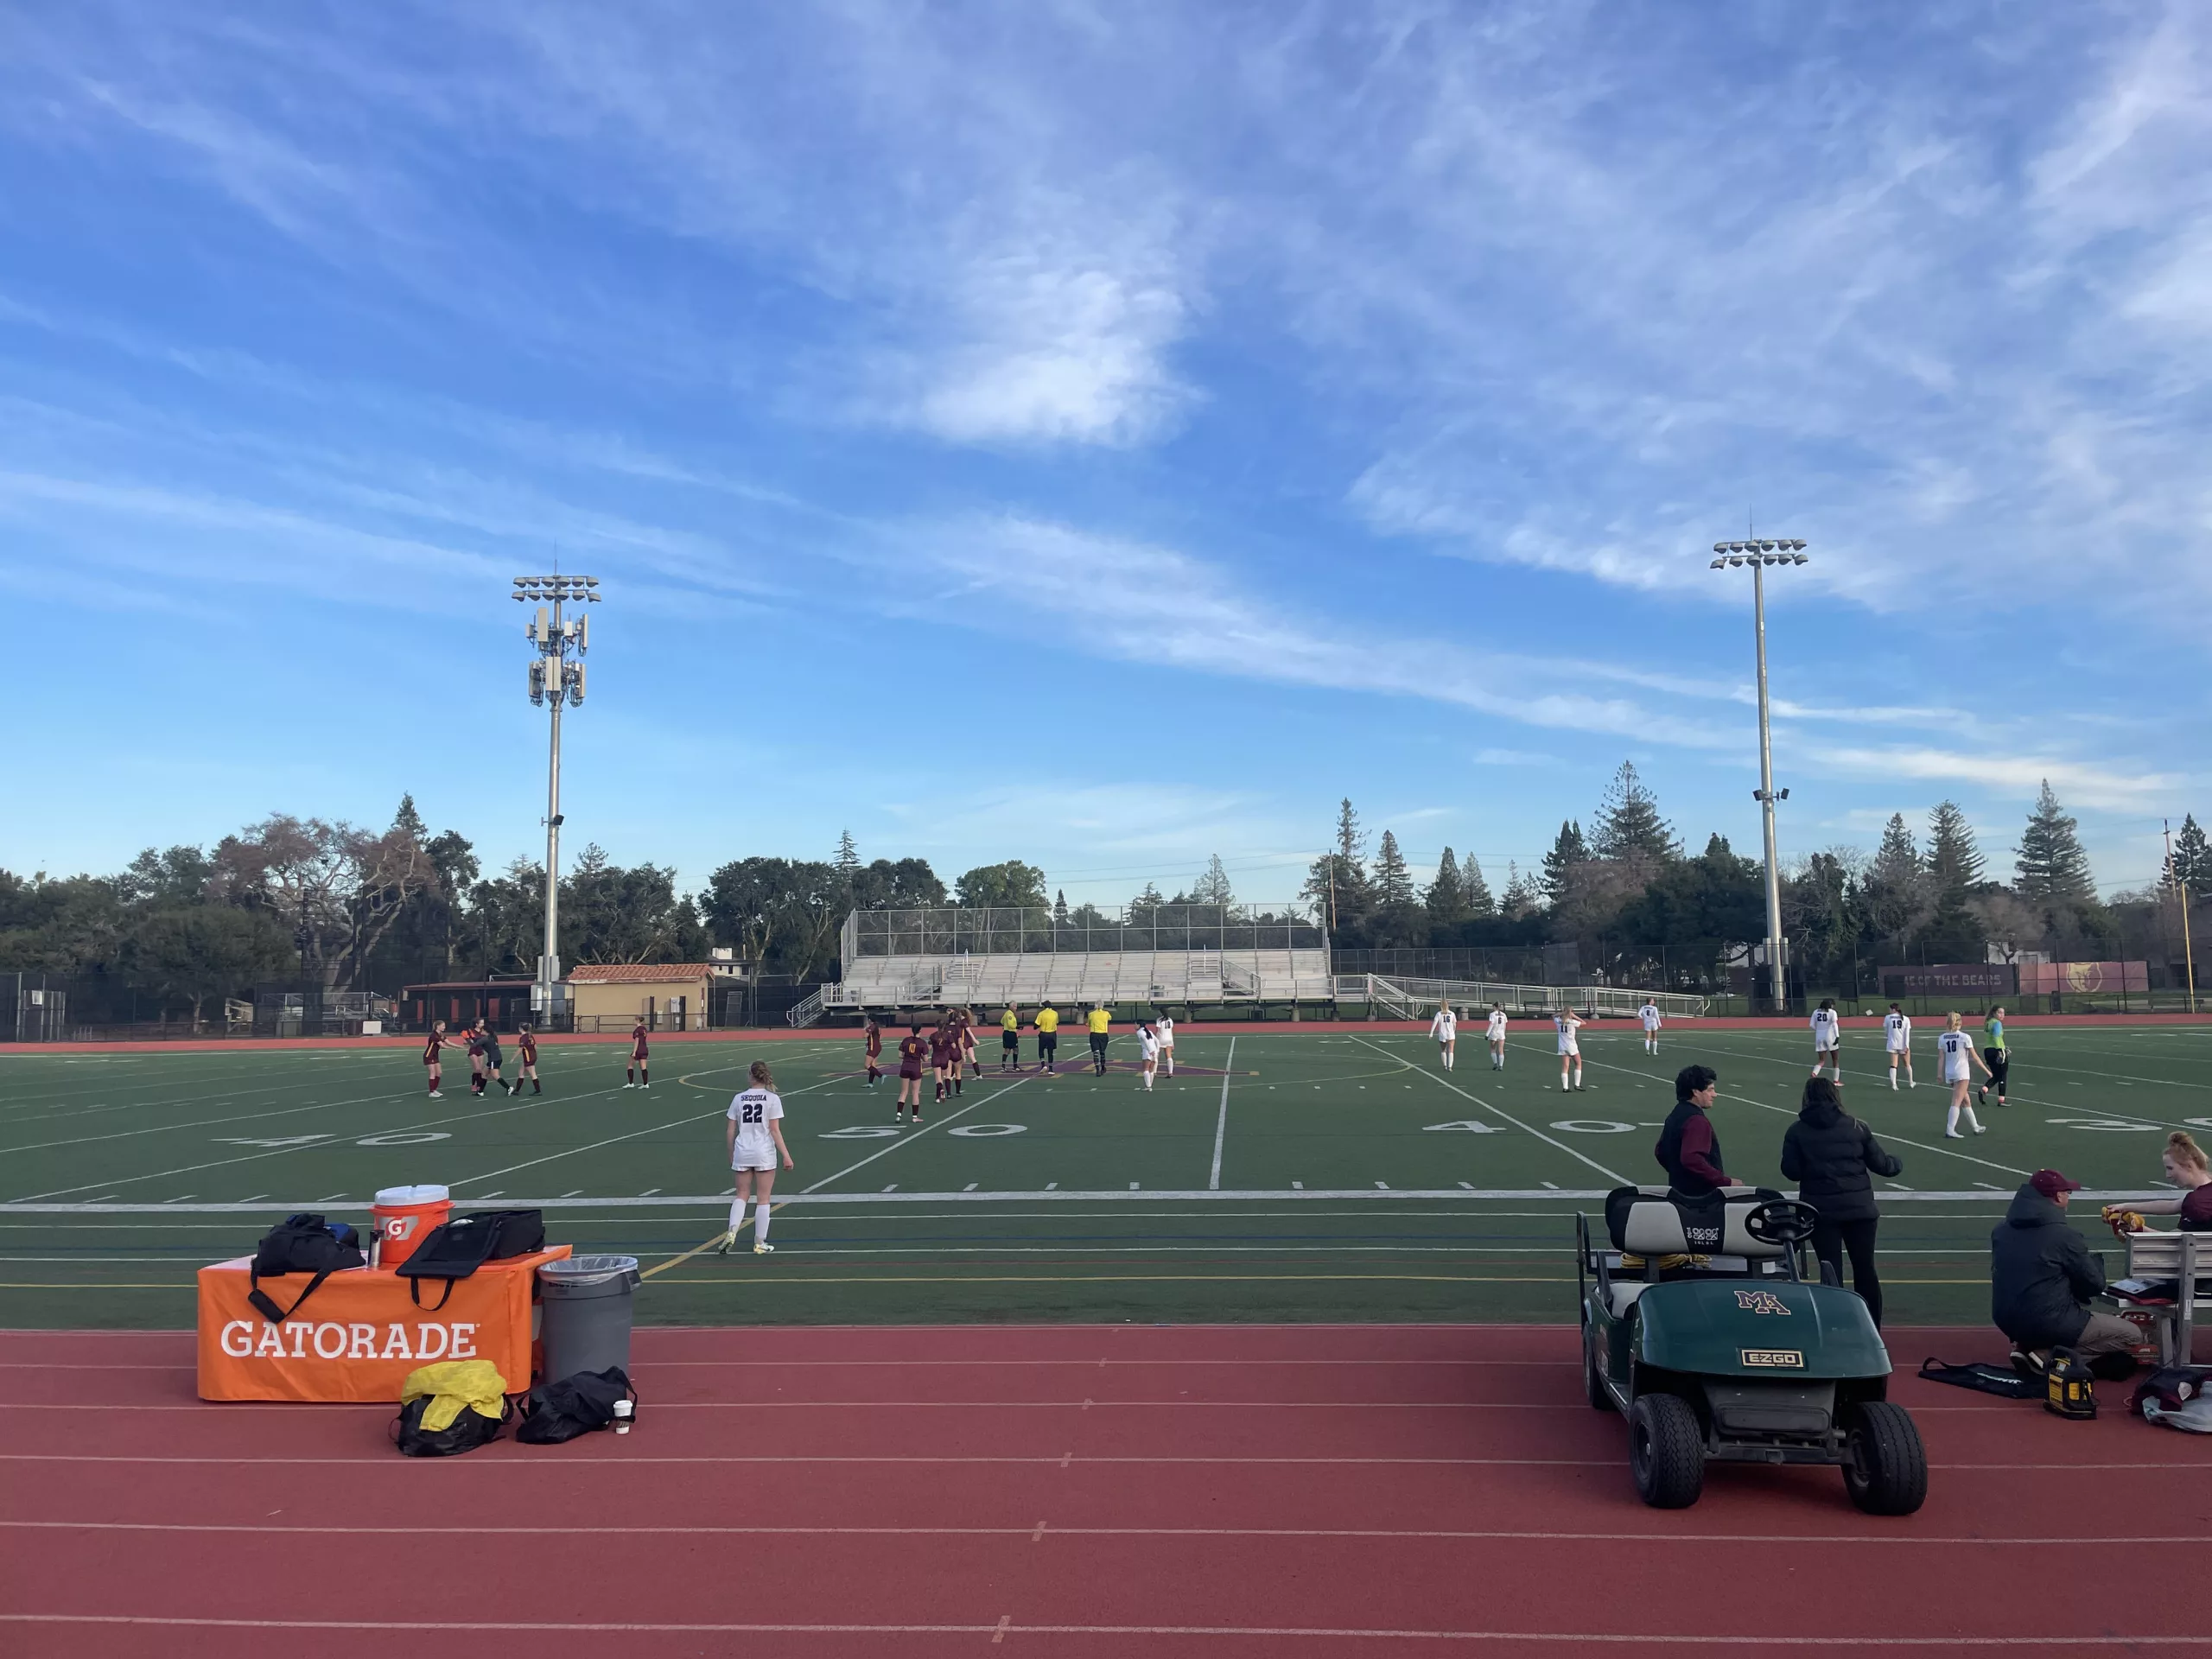 Bears Vs. Ravens: The Girls Soccer Rivalry Ends in a Tie